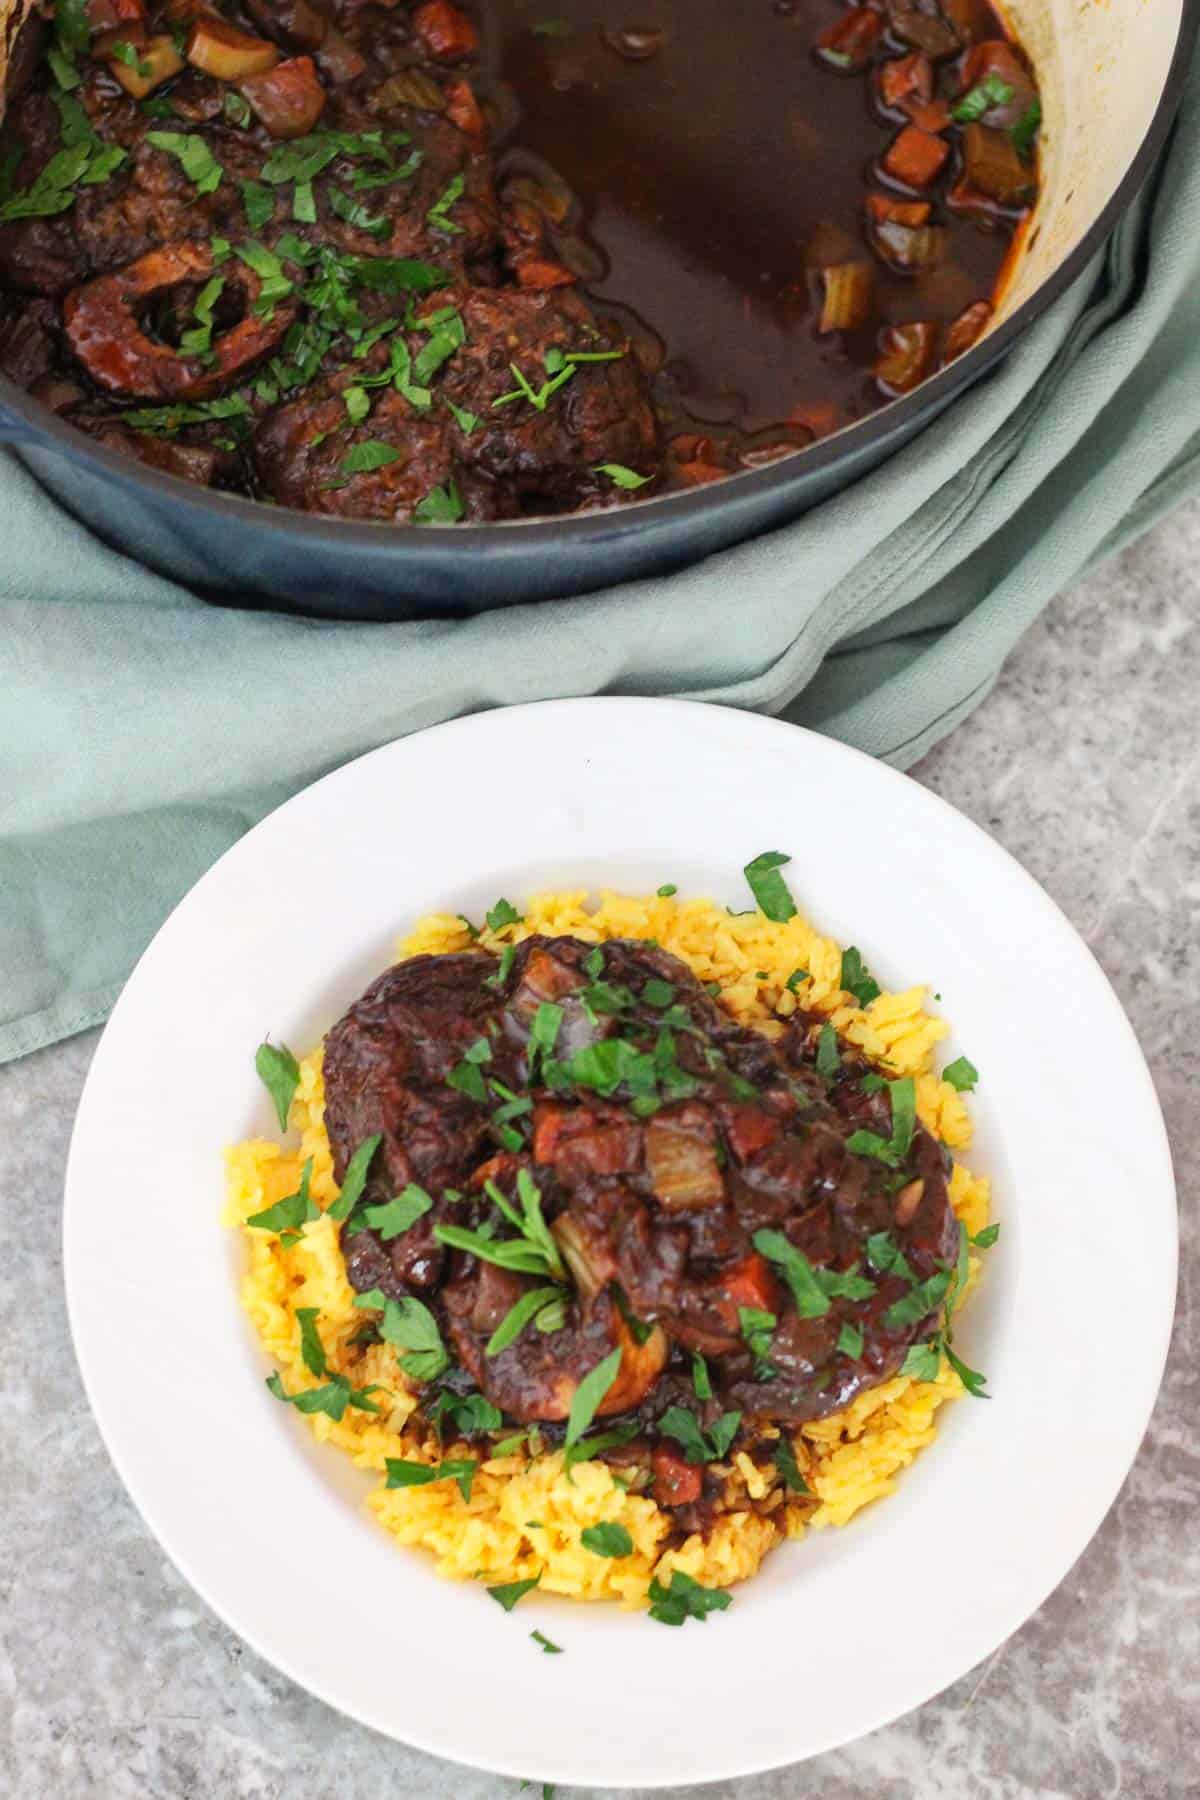 A plate with yellow rice topped with a serving of braised beef shanks. The dutch oven with the remaining beef shanks is right next to the plate.